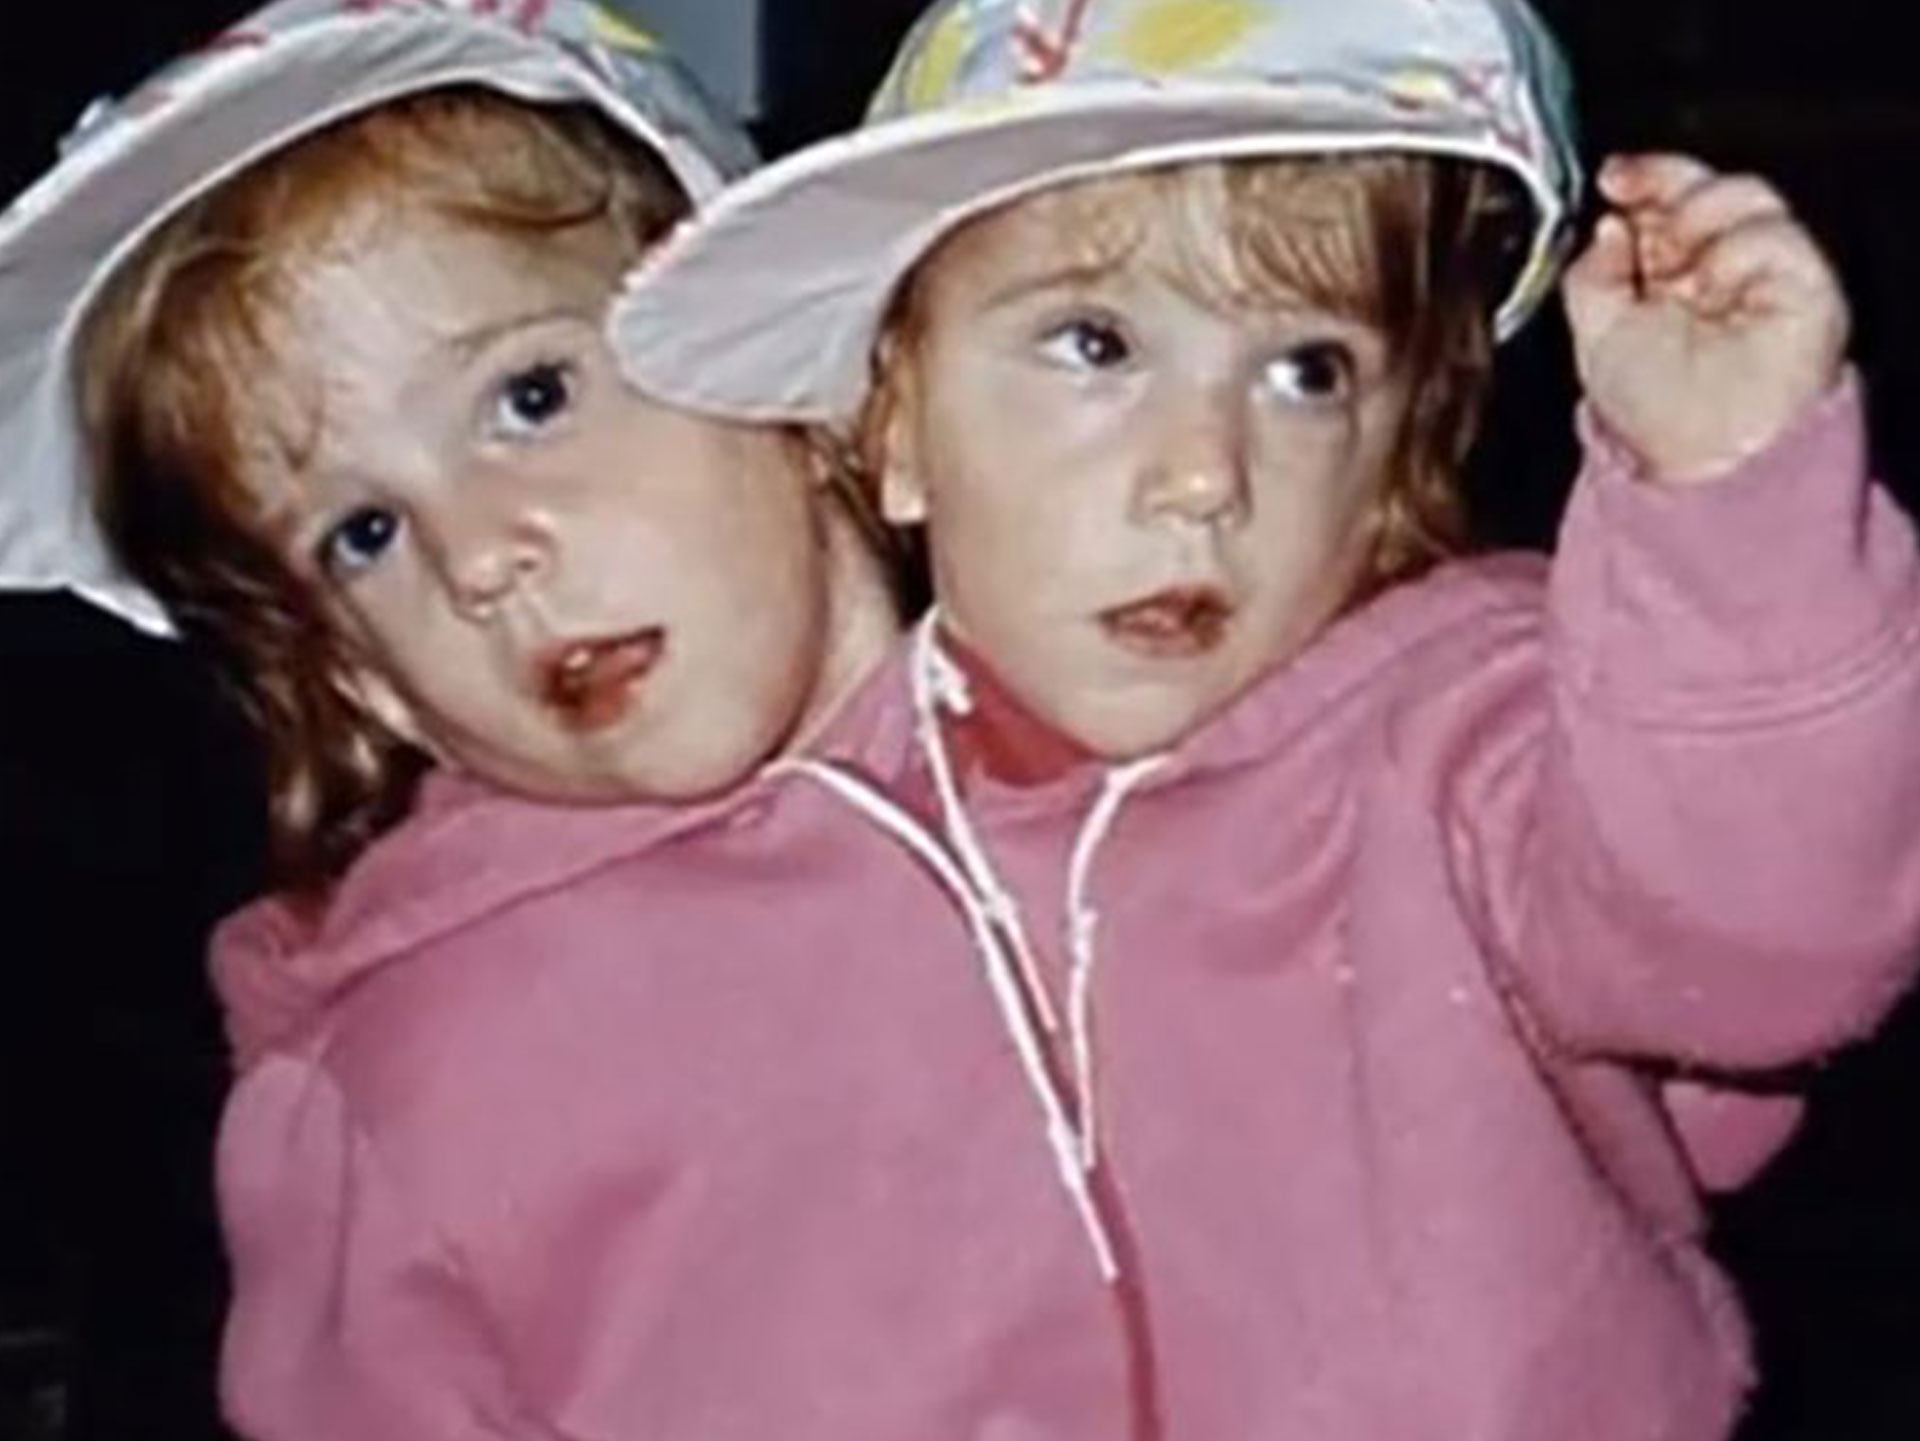 What are conjoined twins Abby and Brittany Hensel up to now?